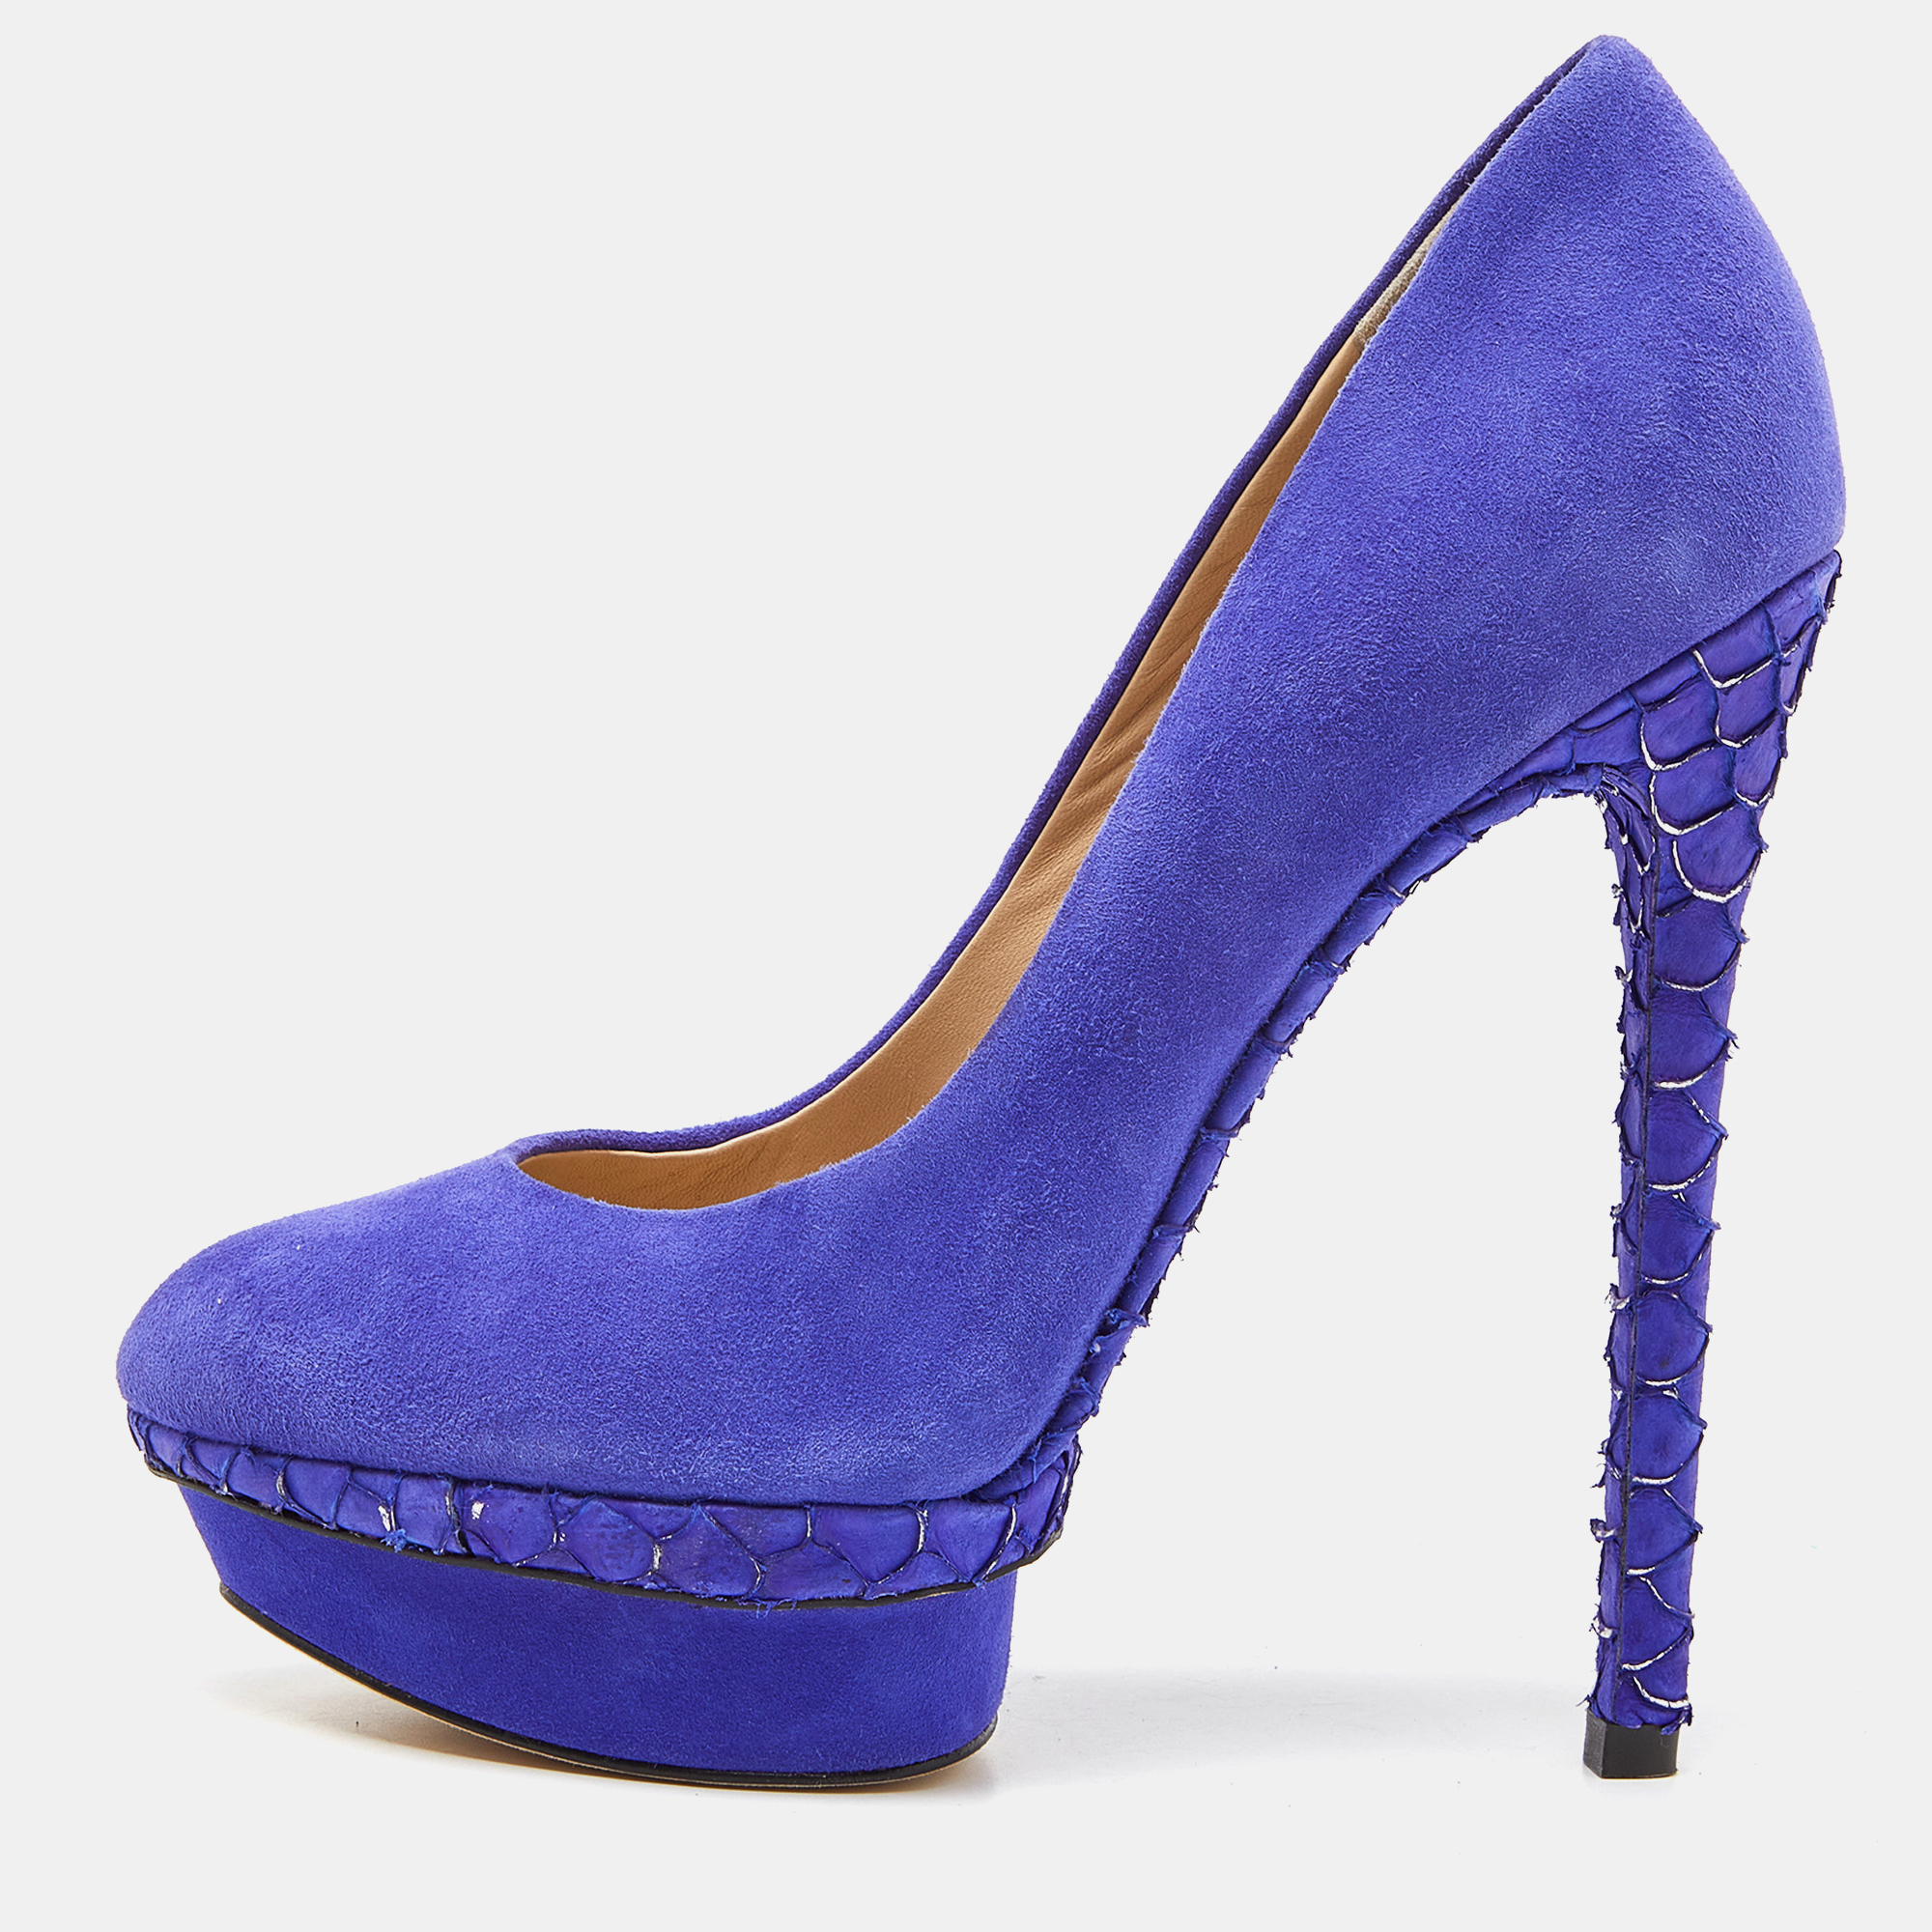 Pre-owned Brian Atwood Blue Suede And Snakeskin Embossed Leather Platform Pumps Size 37